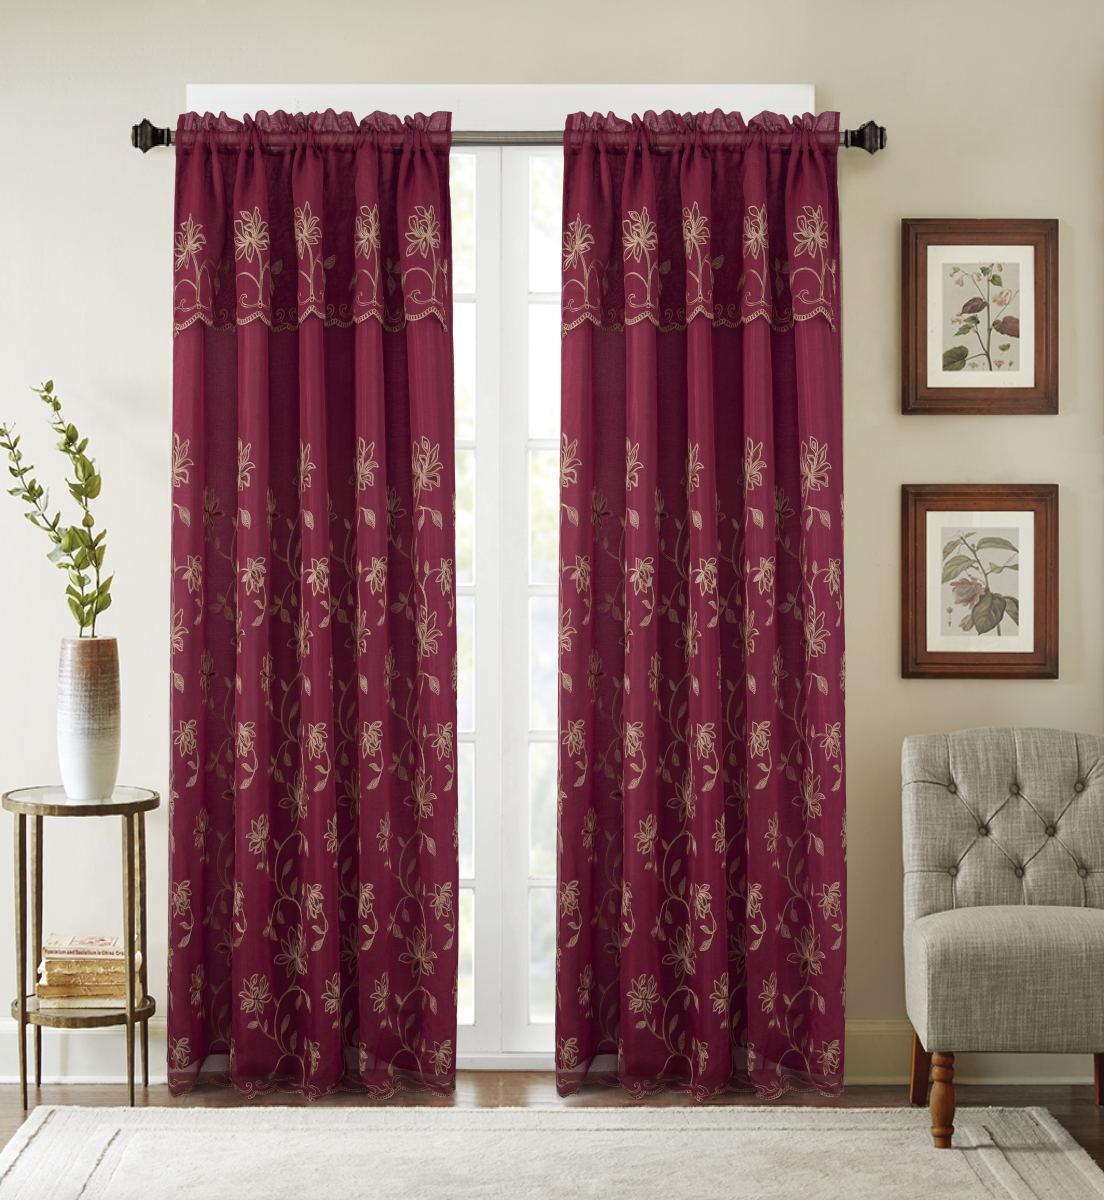 Pnd23613 54 X 84 In. Durant Floral Embroidered Single Rod Pocket Curtain Panel With Attached Valance, Burgundy